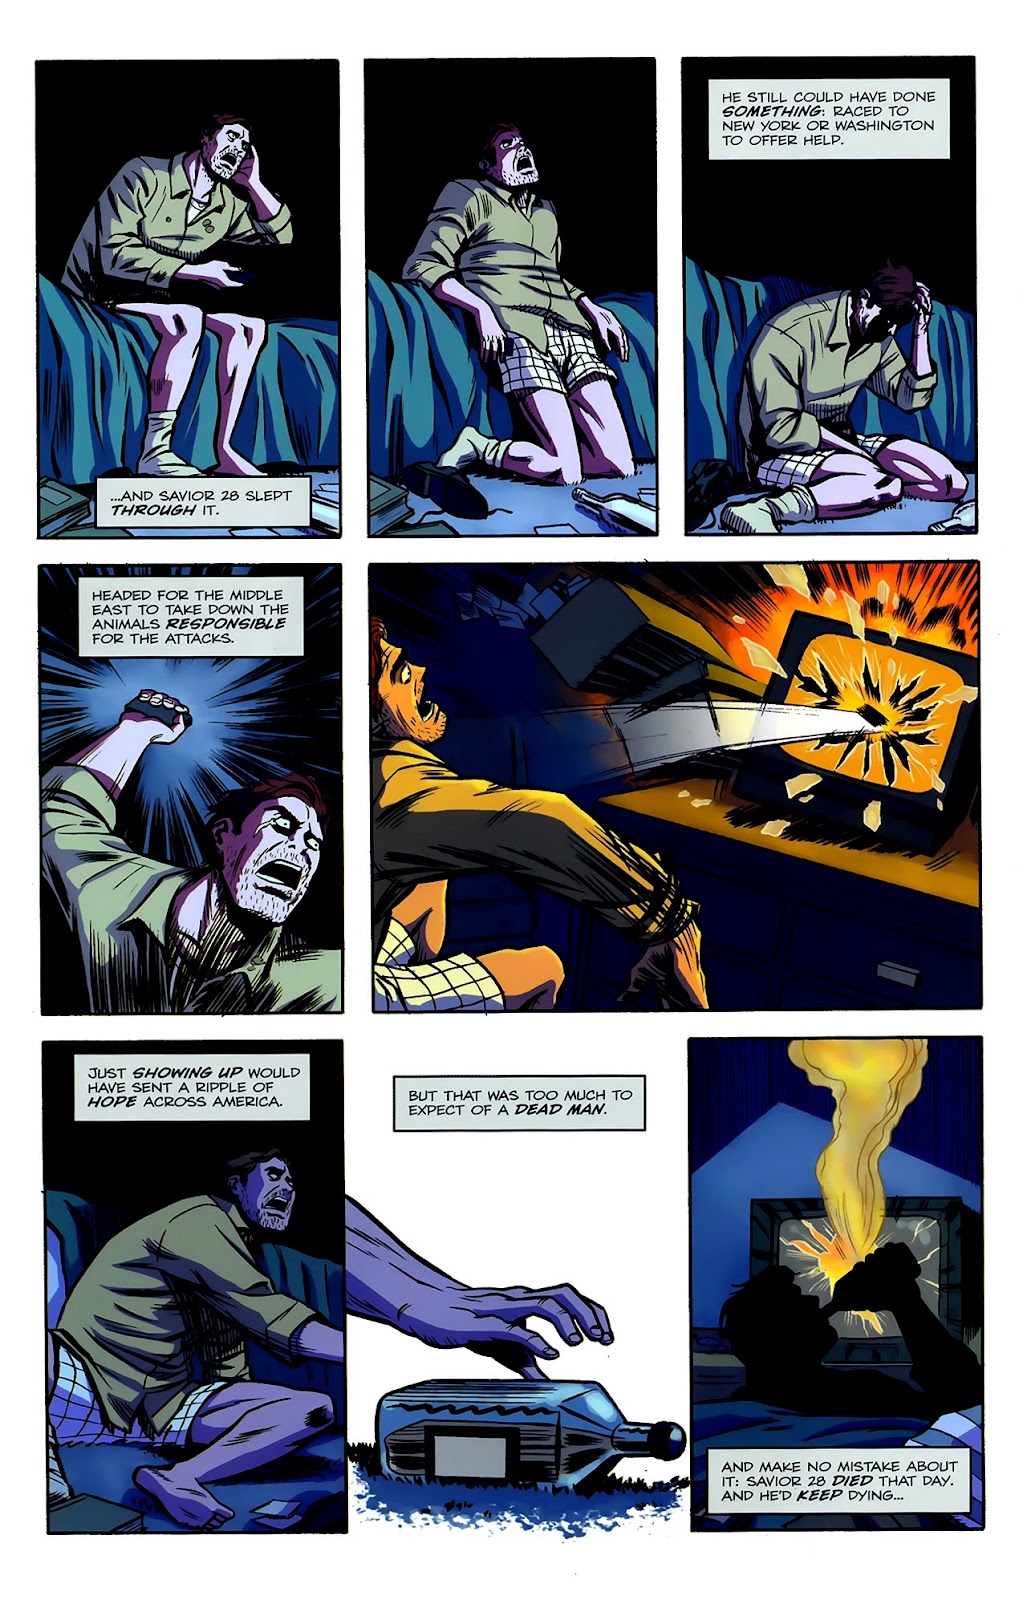 The Life and Times of Savior 28 issue 1 - Page 22